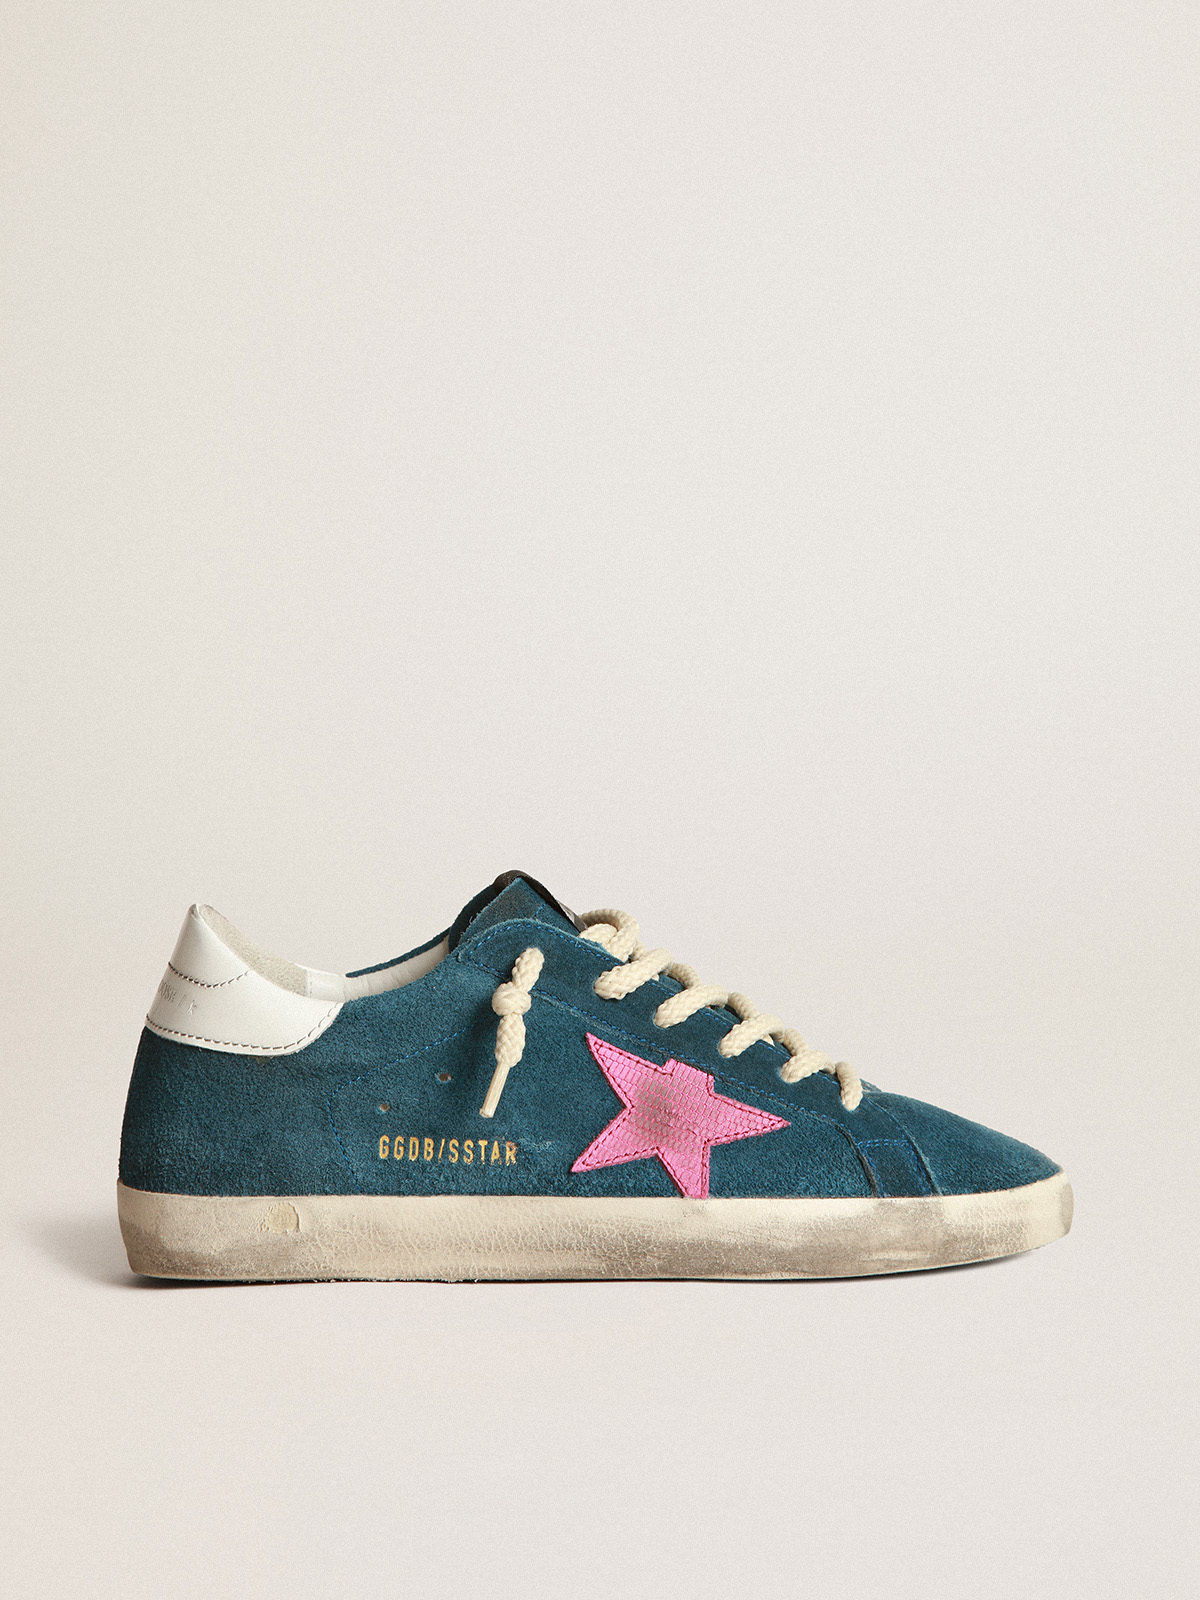 Super-Star sneakers in blue suede with a pink star | Golden Goose